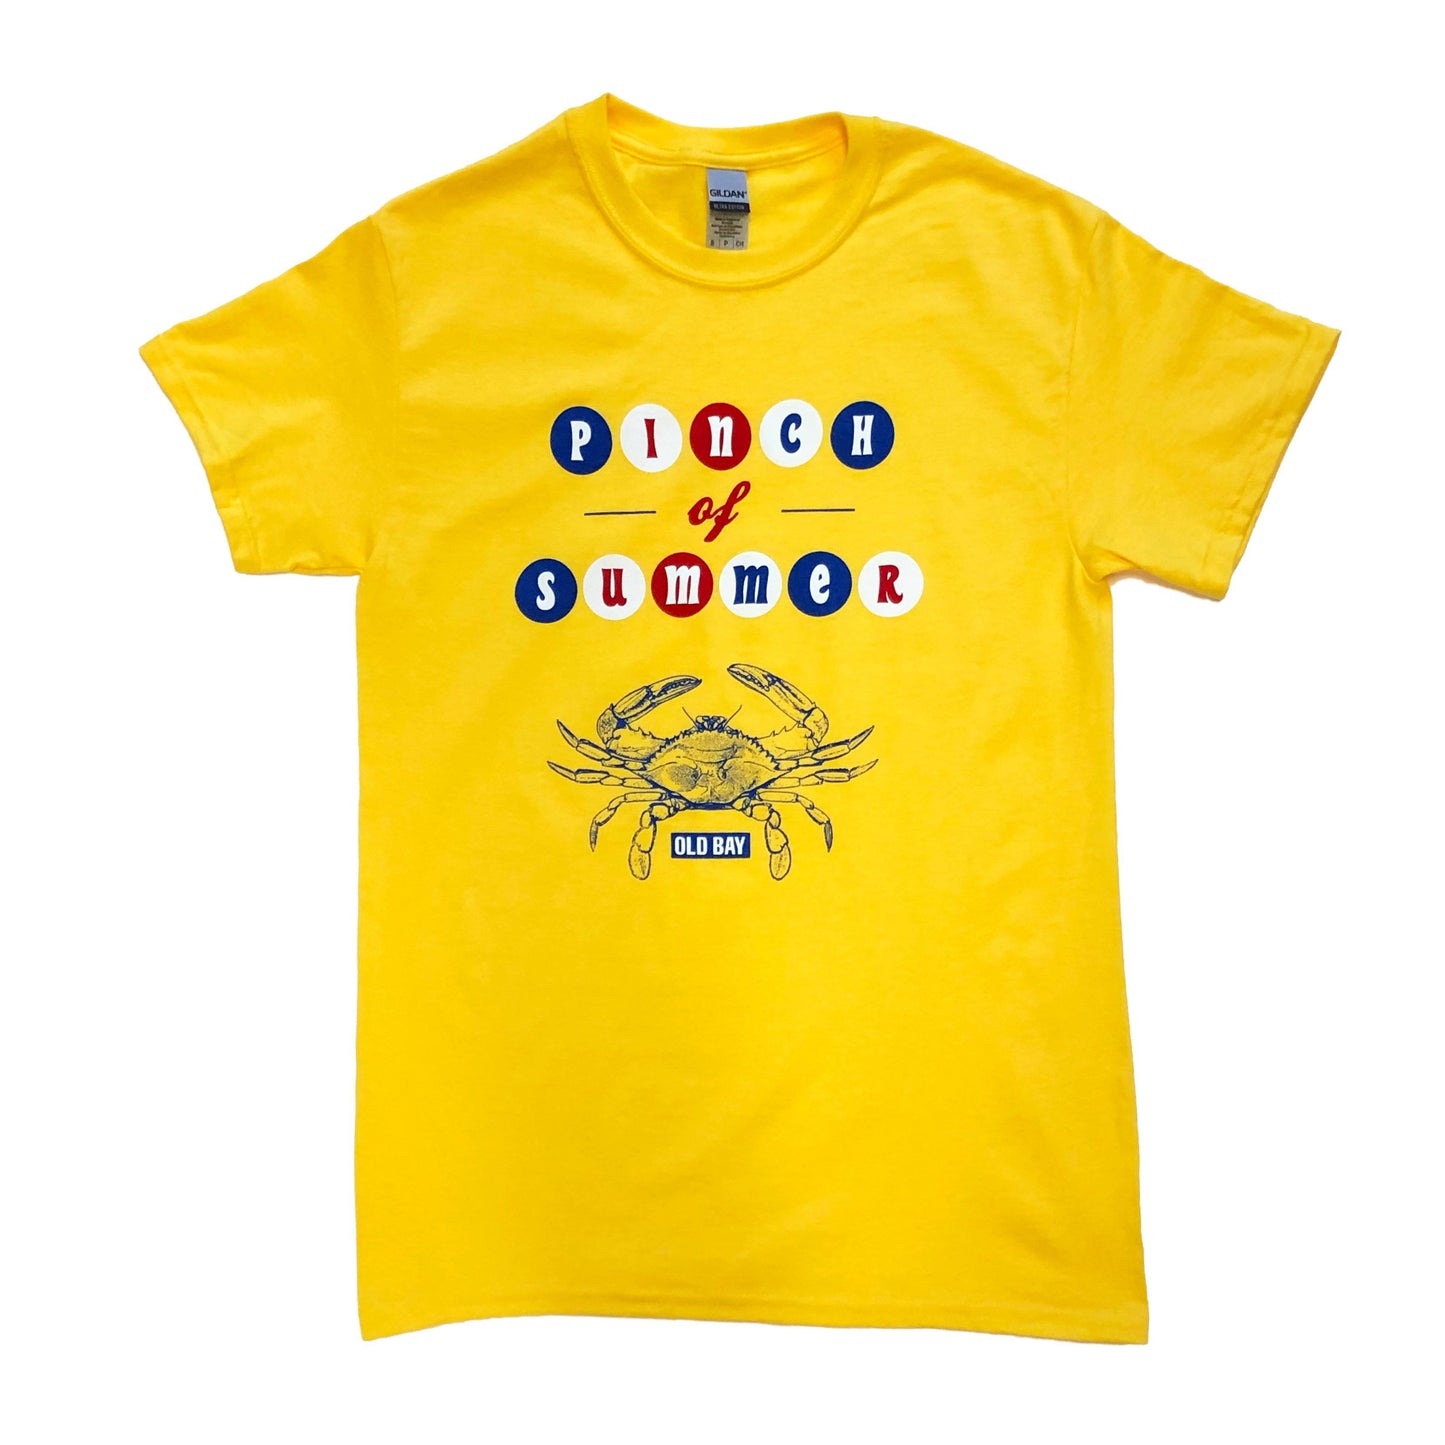 Old Bay Pinch of Summer (Yellow) / Shirt - Route One Apparel